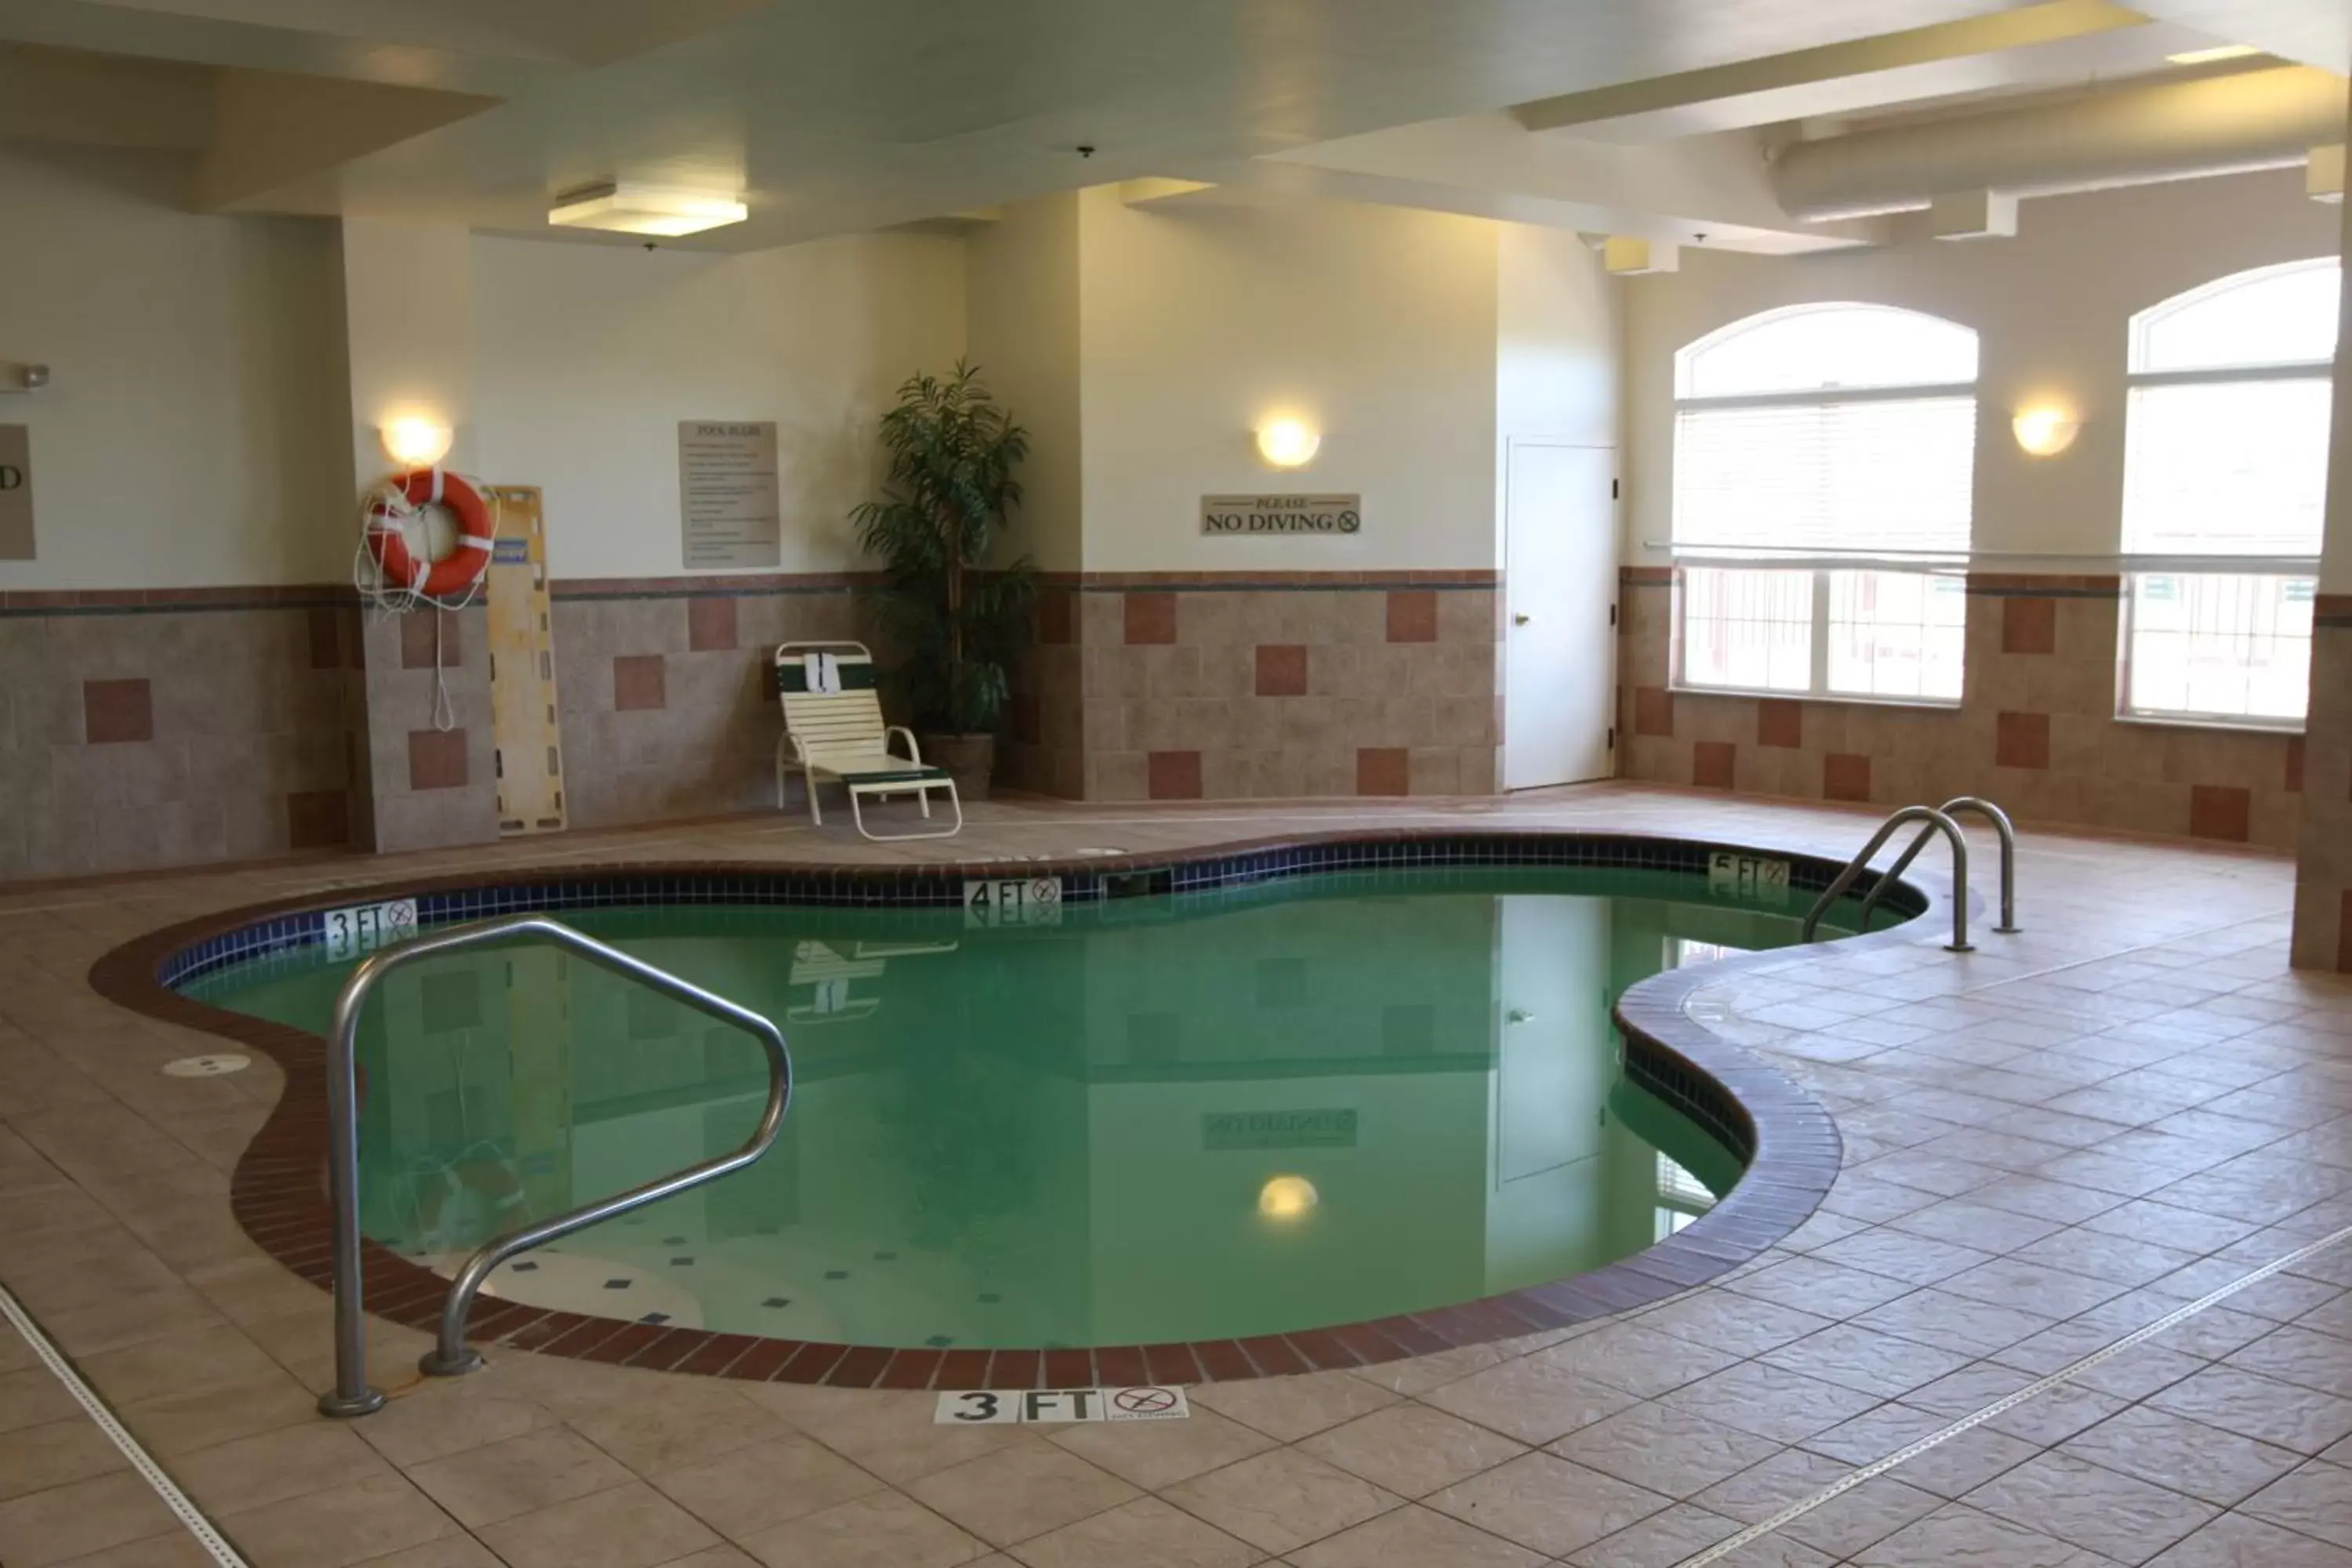 Day, Swimming Pool in Country Inn & Suites by Radisson, Findlay, OH